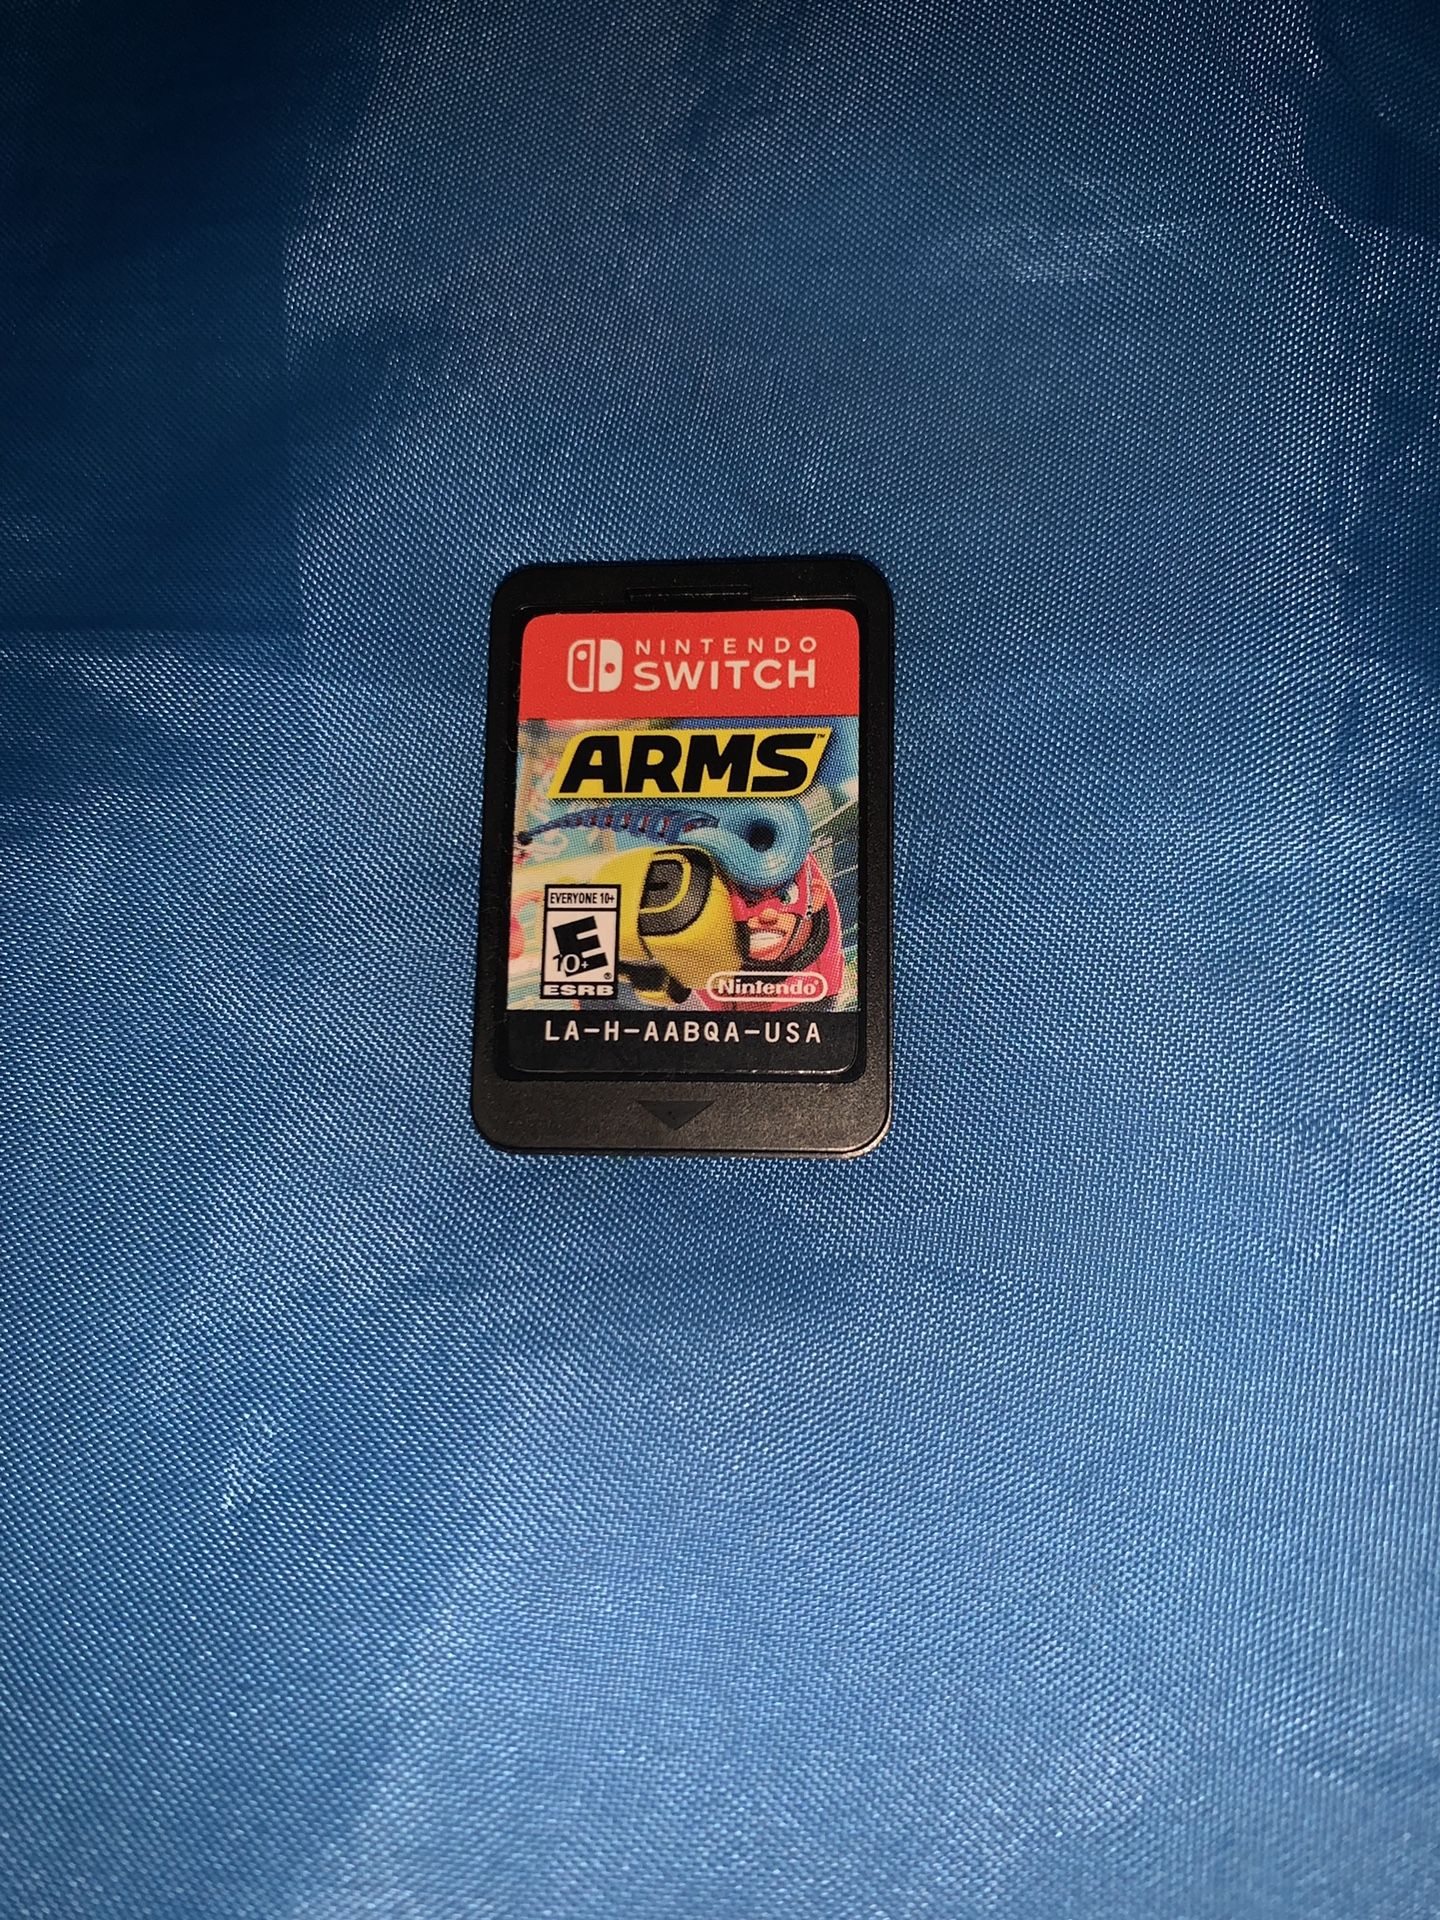 ARMS - Nintendo Switch Game